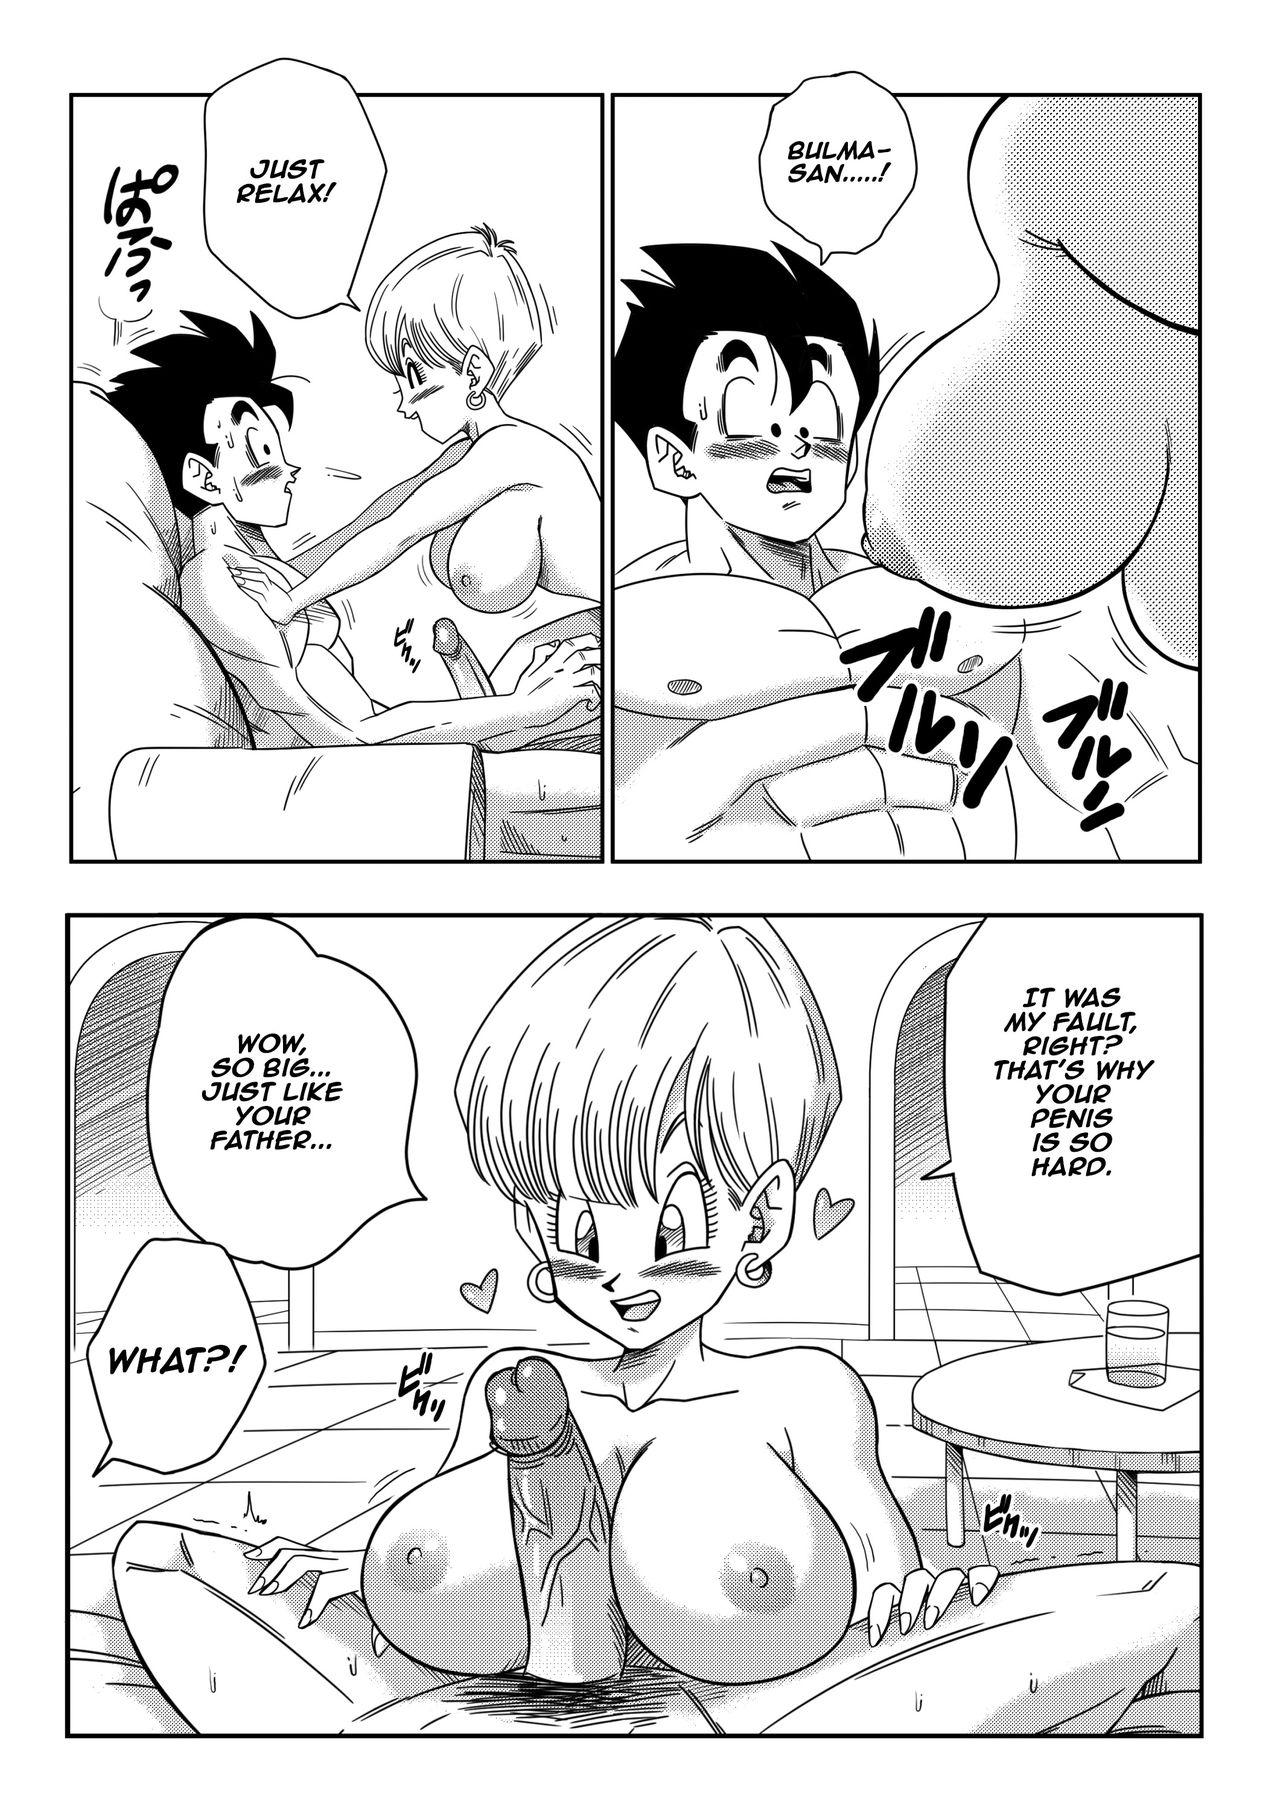 Teenager LOVE TRIANGLE Z PART 3 - Dragon ball z Roughsex - Page 6